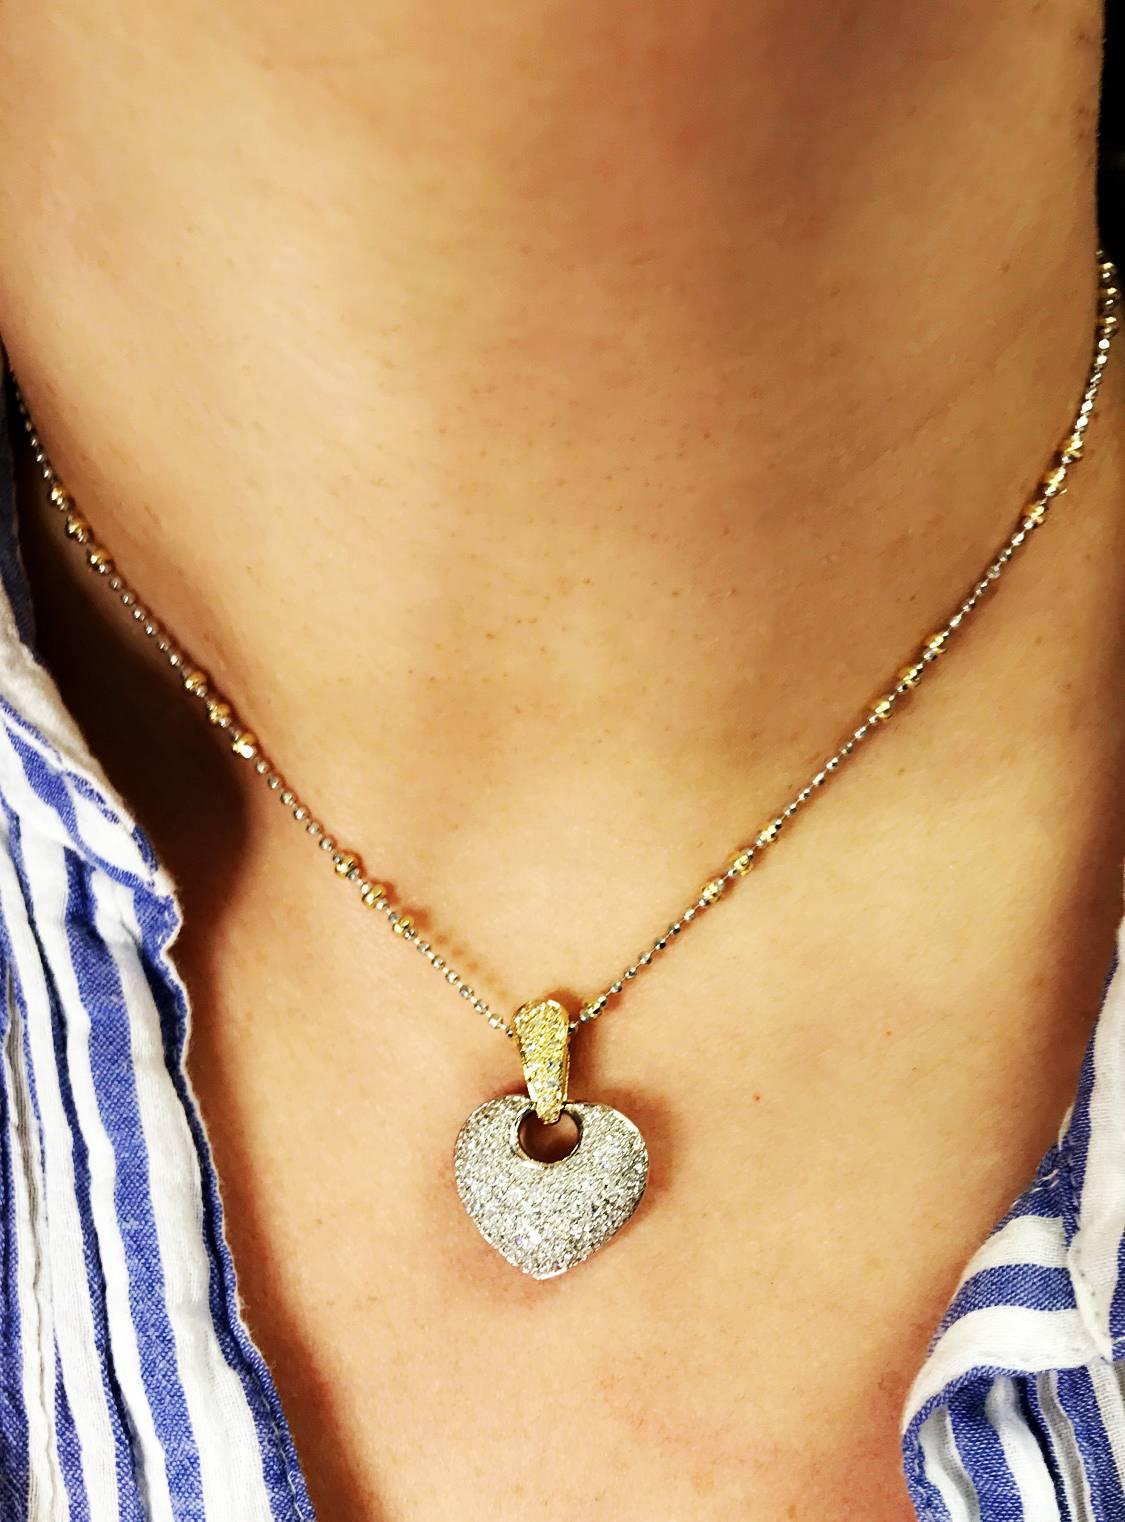 18K Yellow and White Gold Heart Pendant with Two-Tone Chain

Heart pendant has diamonds covering entirely.

Heart has 1.43ct. diamonds set.

Chain is done in yellow and white gold. 16 inches in length.

Heart pendant is 1 inch in length.